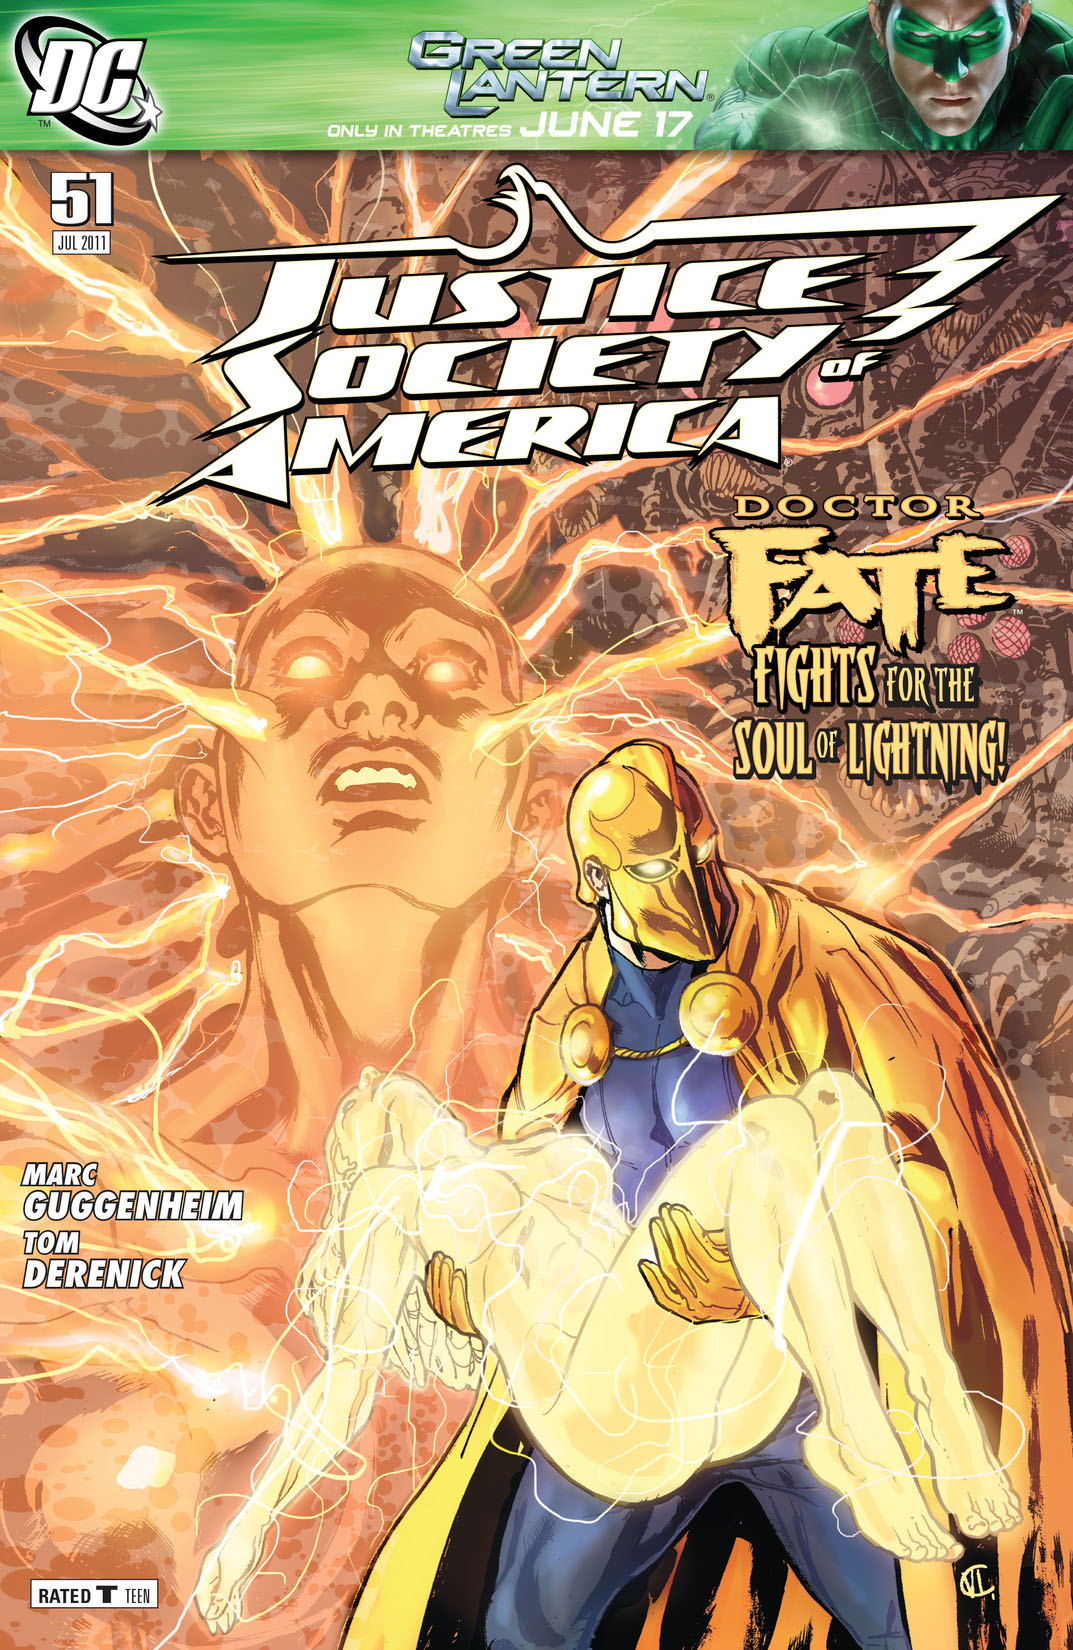 Justice Society of America (2006-) #51 preview images